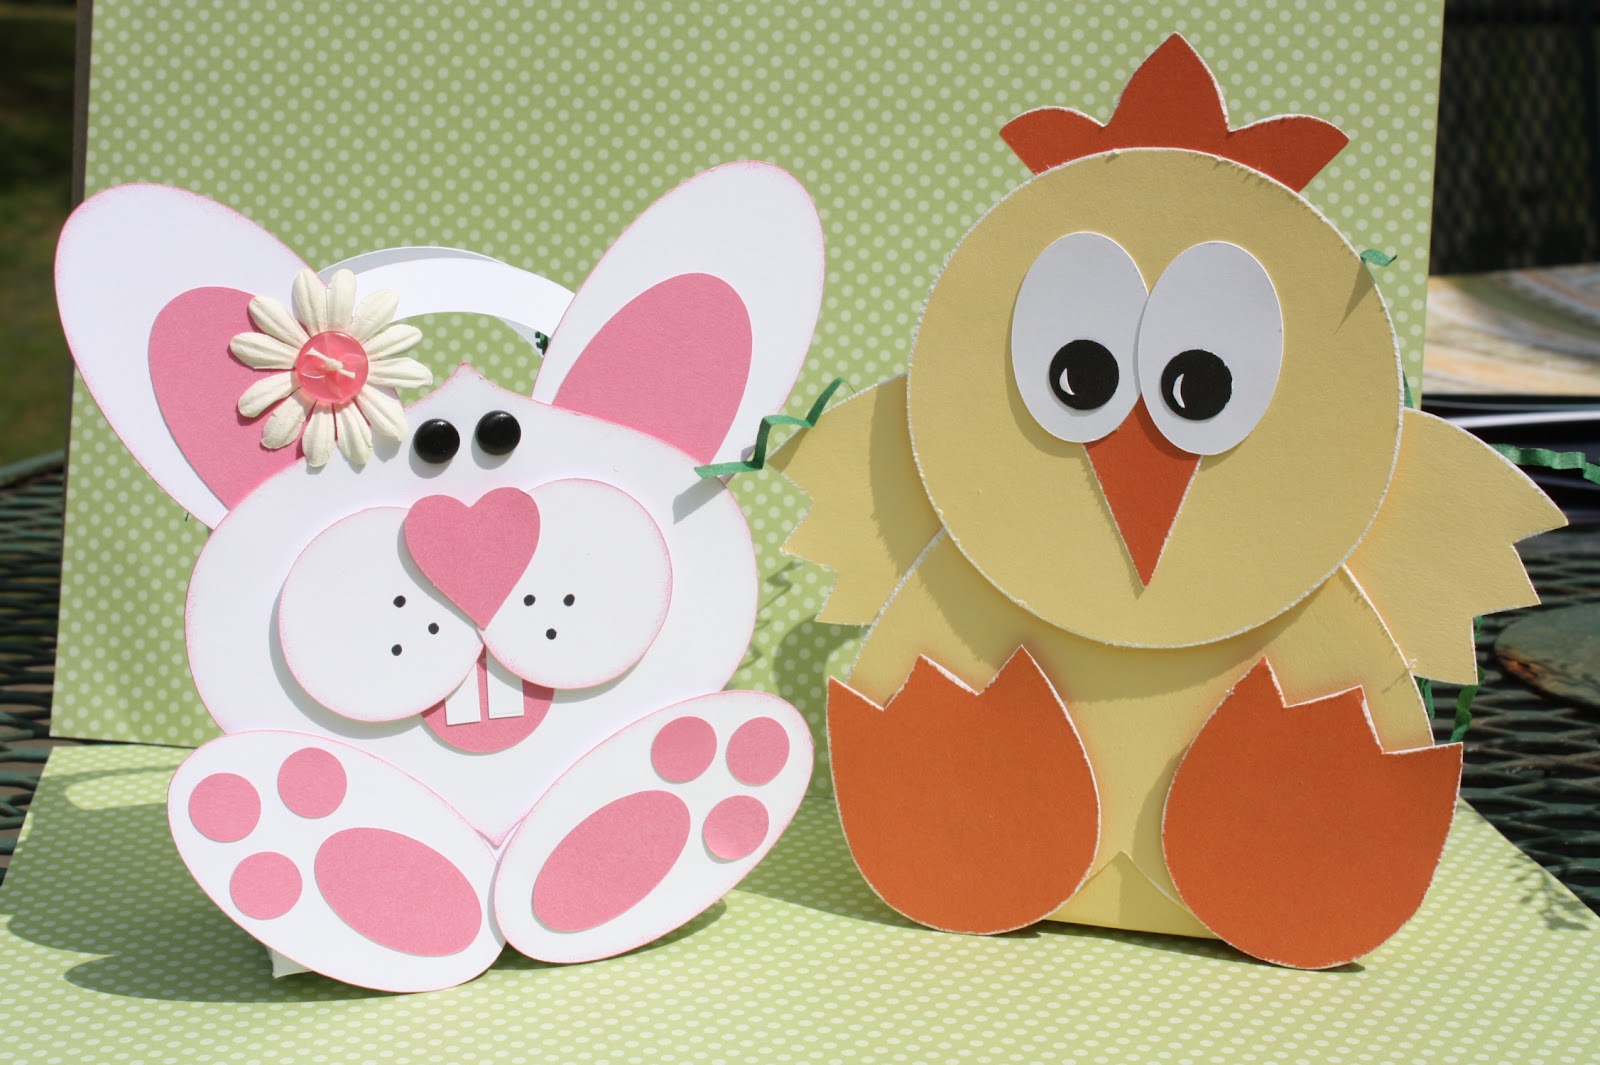 Classic Christina: Incredibly CUTE Easter baskets using the Cricut Art